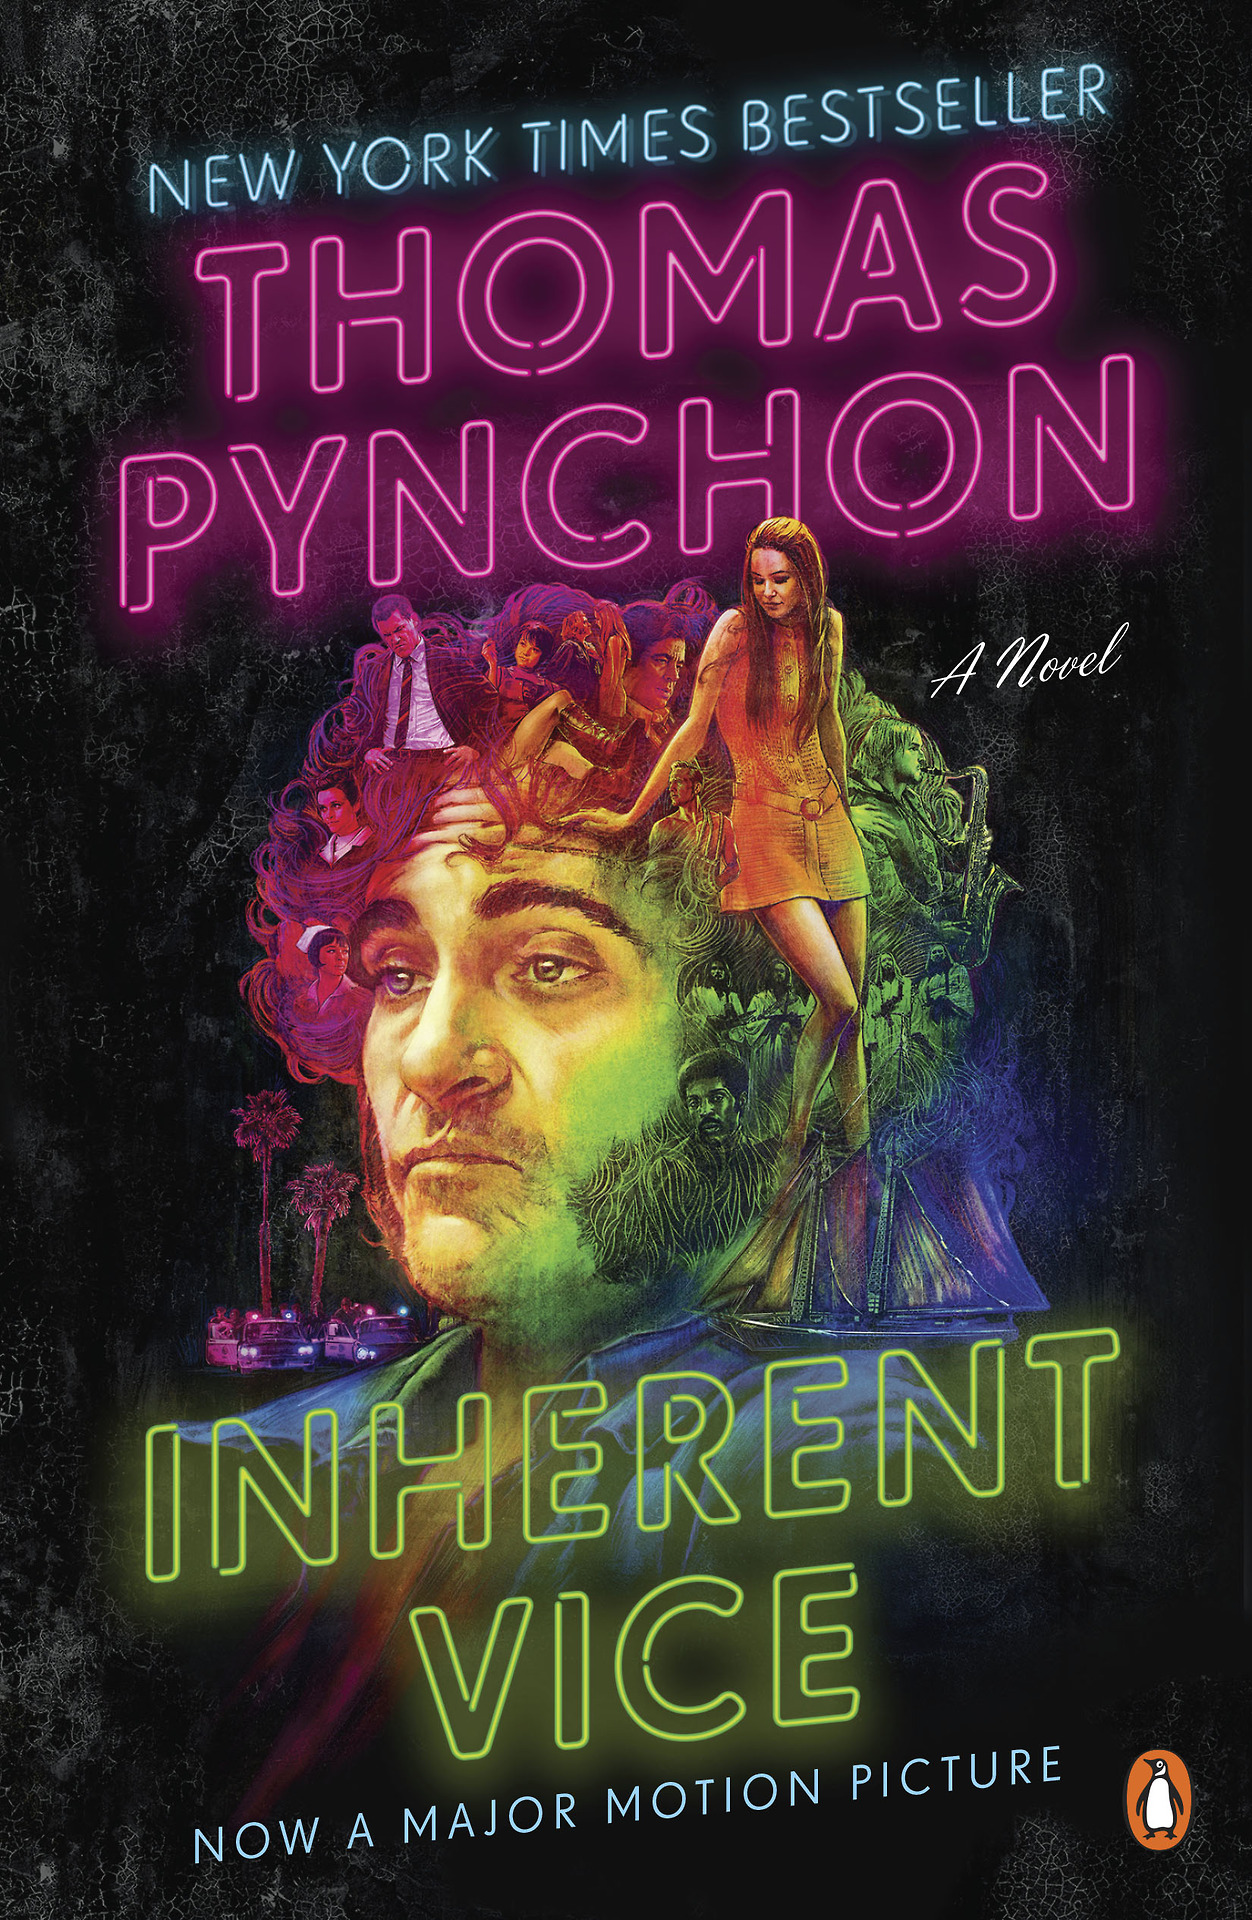 Listen: Paul Thomas Anderson Talks 'Inherent Vice' and More In One-Hour Conversation